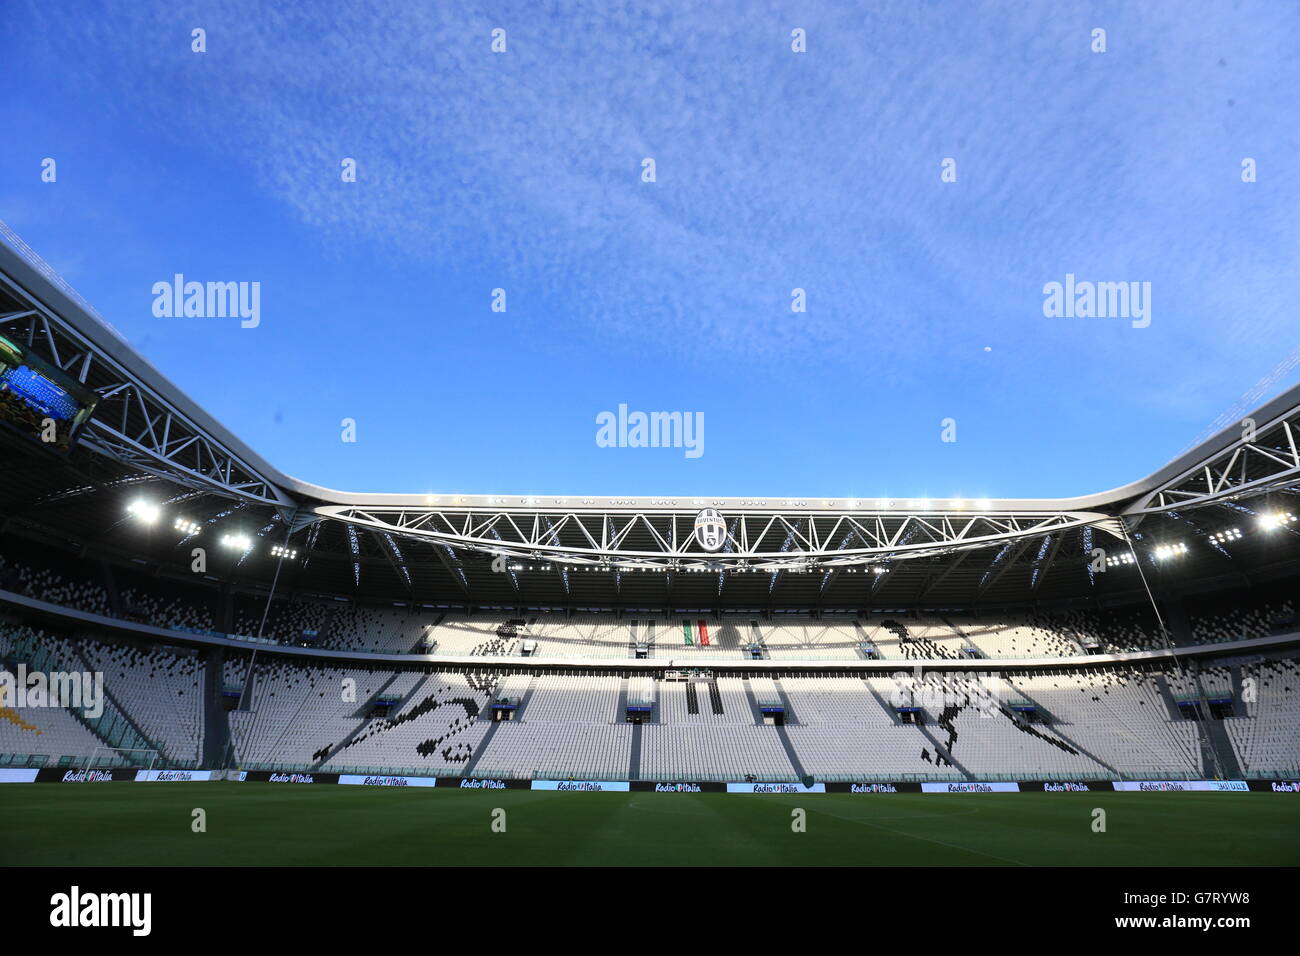 A general view of the Juventus Stadium, Turin, Italy. Stock Photo